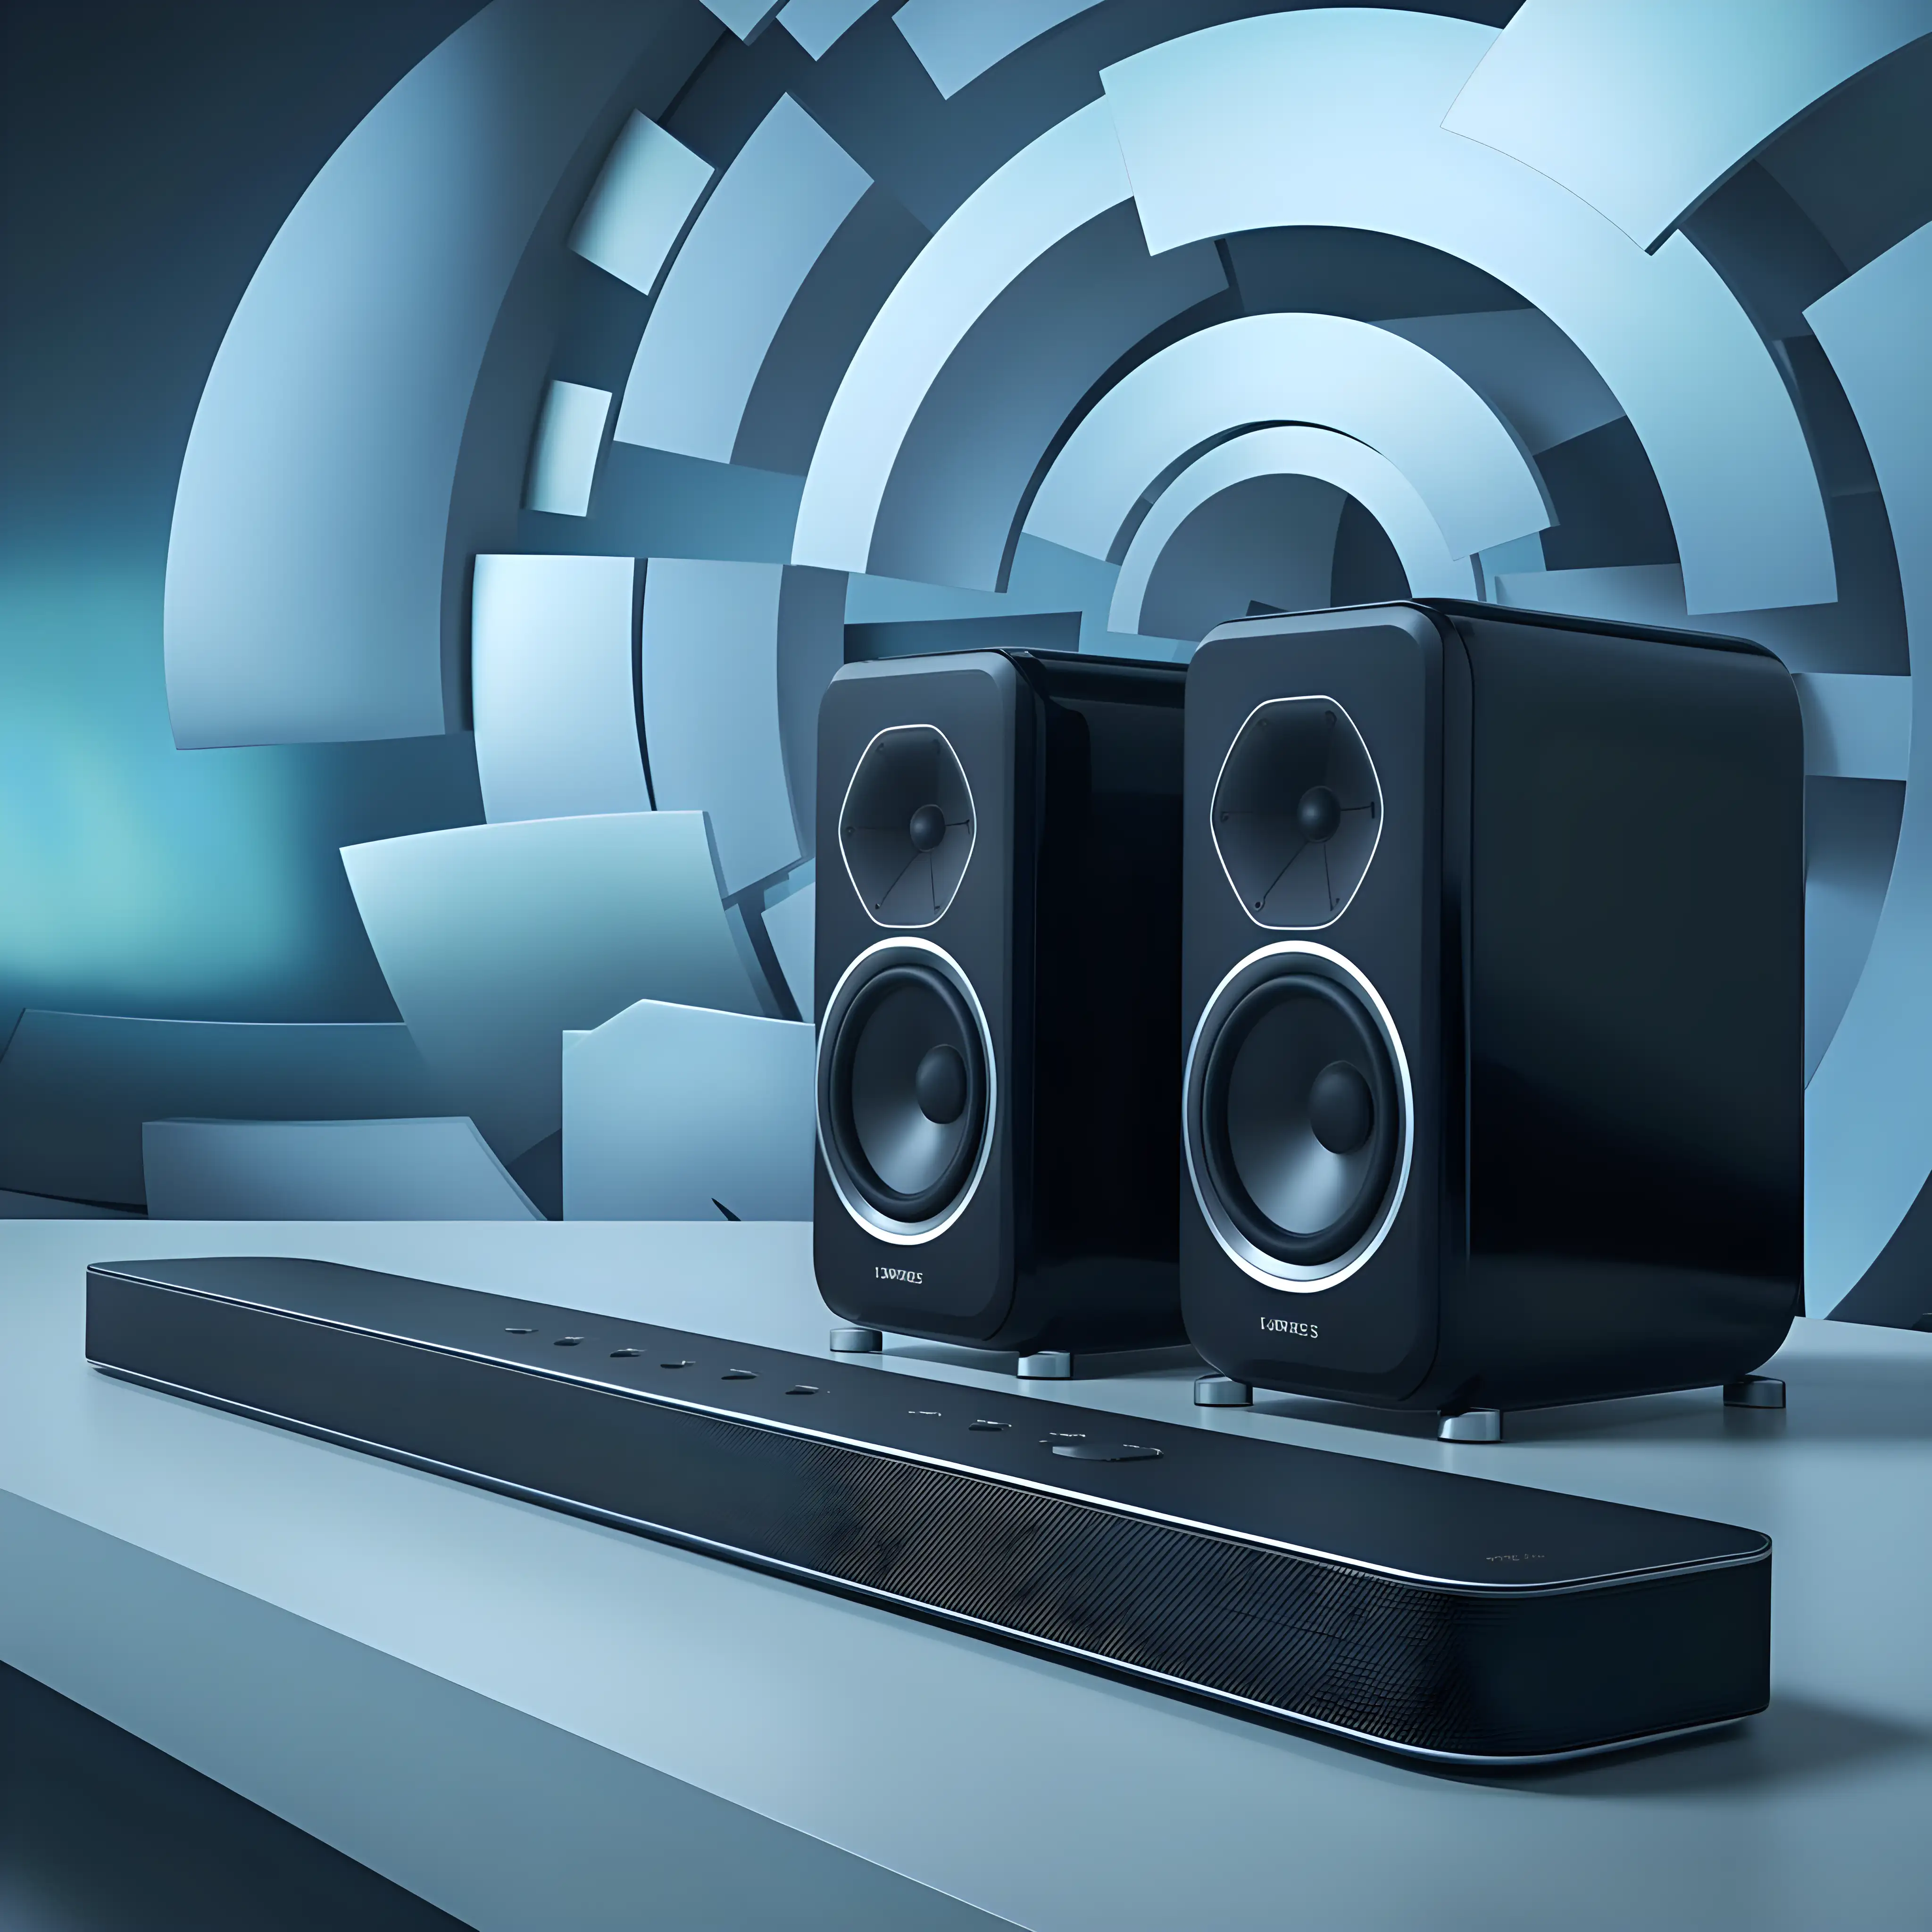 SOUNBAR AND MULTIMEDIA SPEAKERS NEW ON MARKET , the element must be front of me WITH COOL BACKROUND PORTRAIT